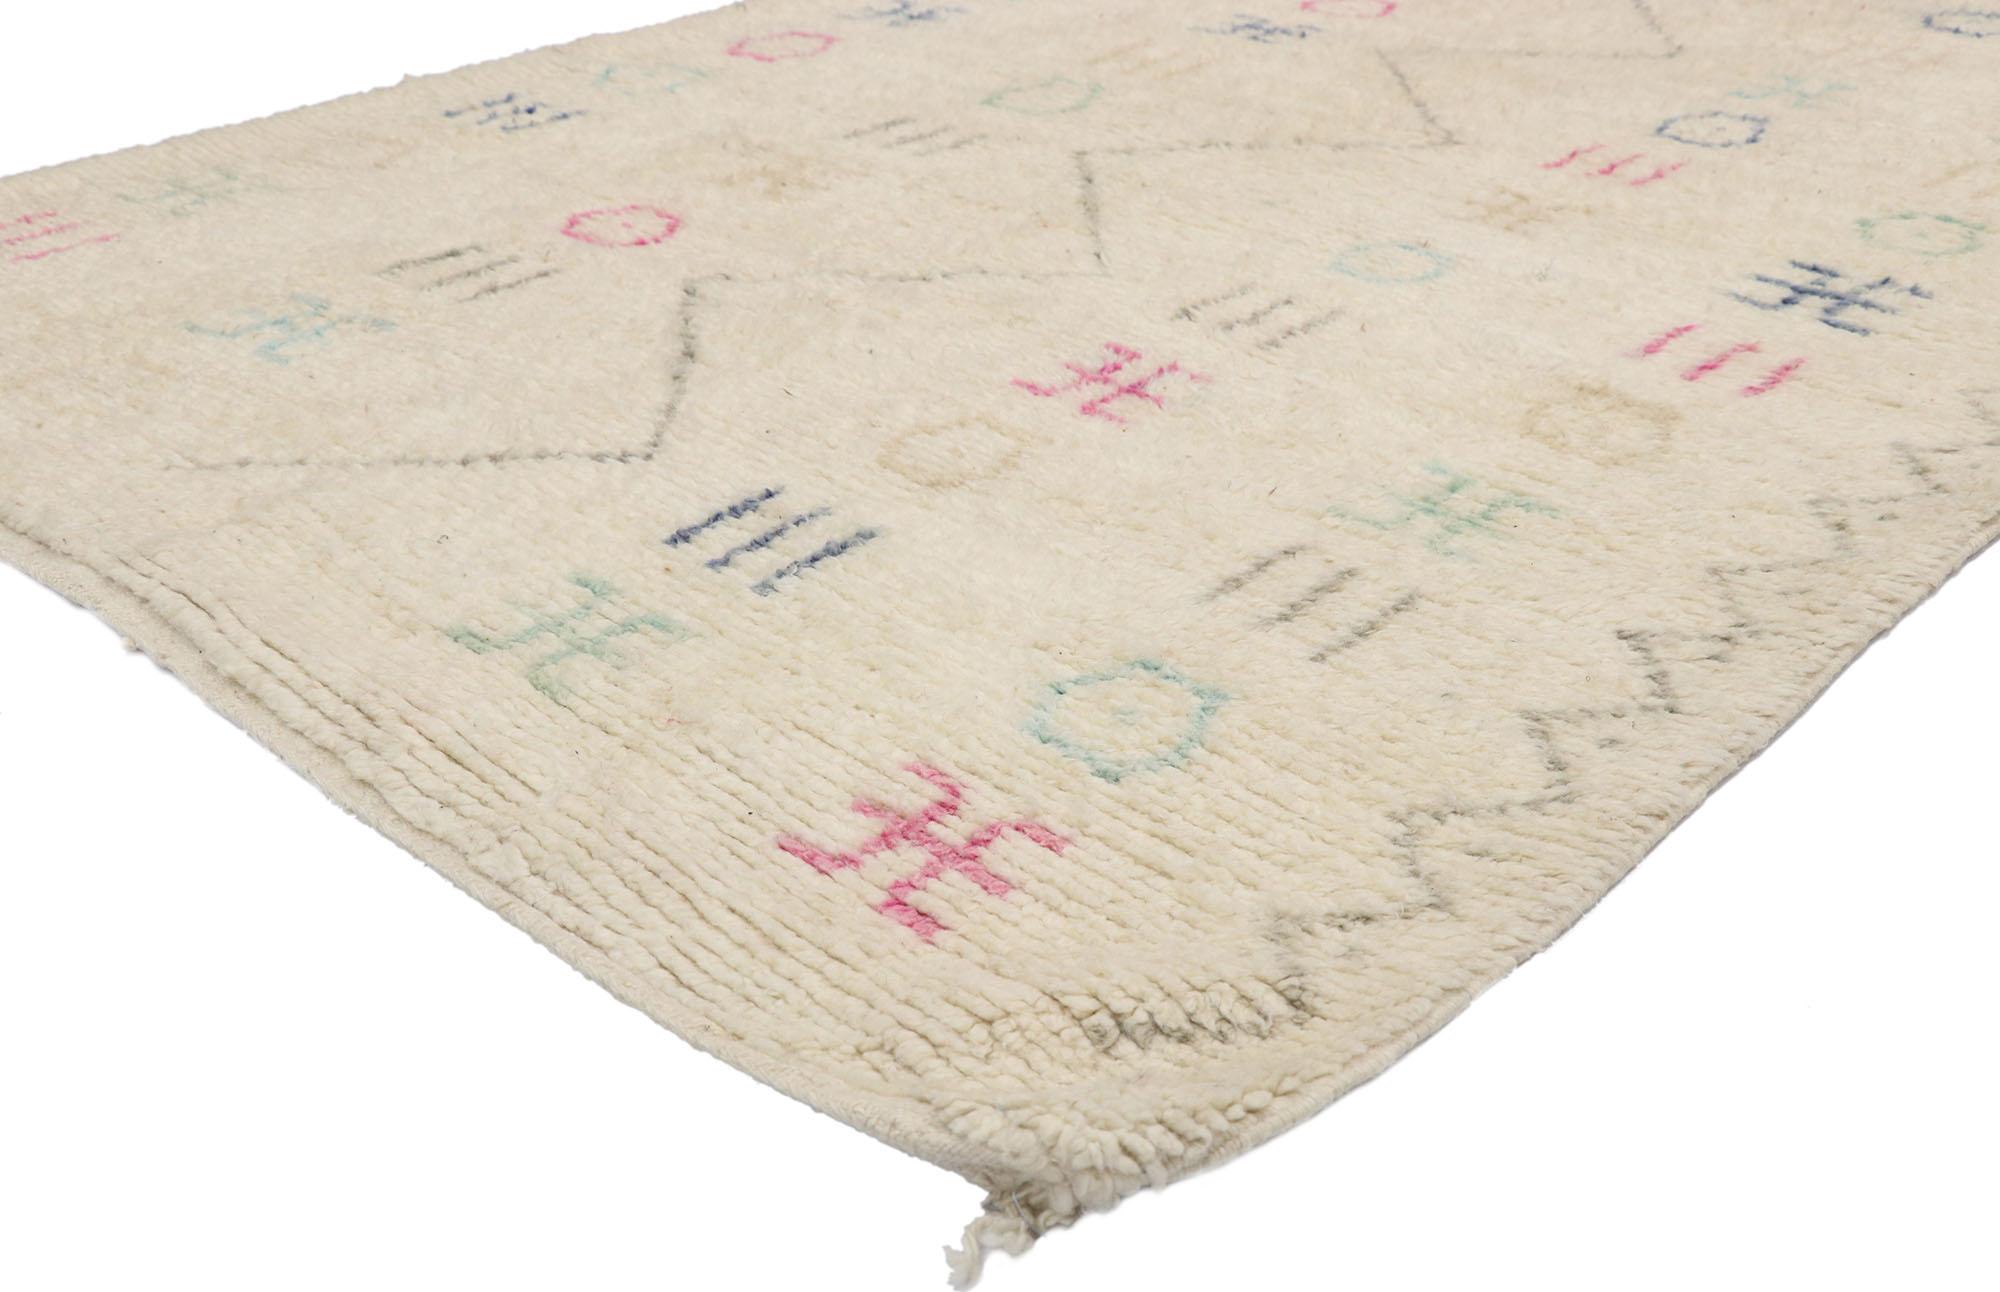 21075, contemporary Berber Moroccan Azilal rug with Bohemian style and Cozy Hygge Vibes 05'01 x 08'00. Displaying well-balanced asymmetry and a bold geometric art form, this contemporary Moroccan Azilal rug beautifully embodies boho chic style with